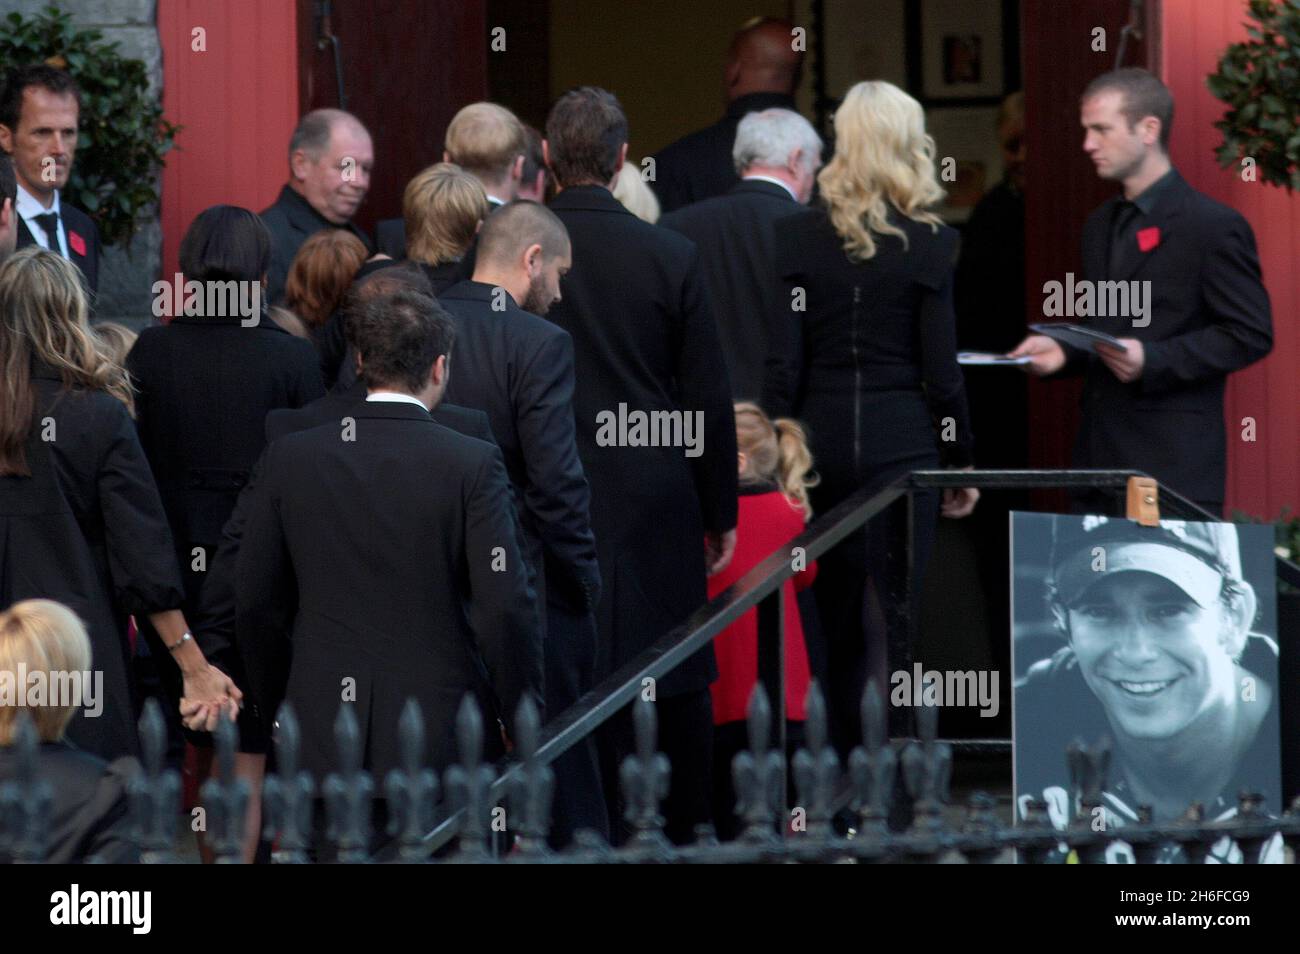 The funeral of Boyzone singer Stephen Gately took place today at the Church of St Laurence O'Toole in Dublin. Gately died of natural cause last weekend aged 33. Stock Photo